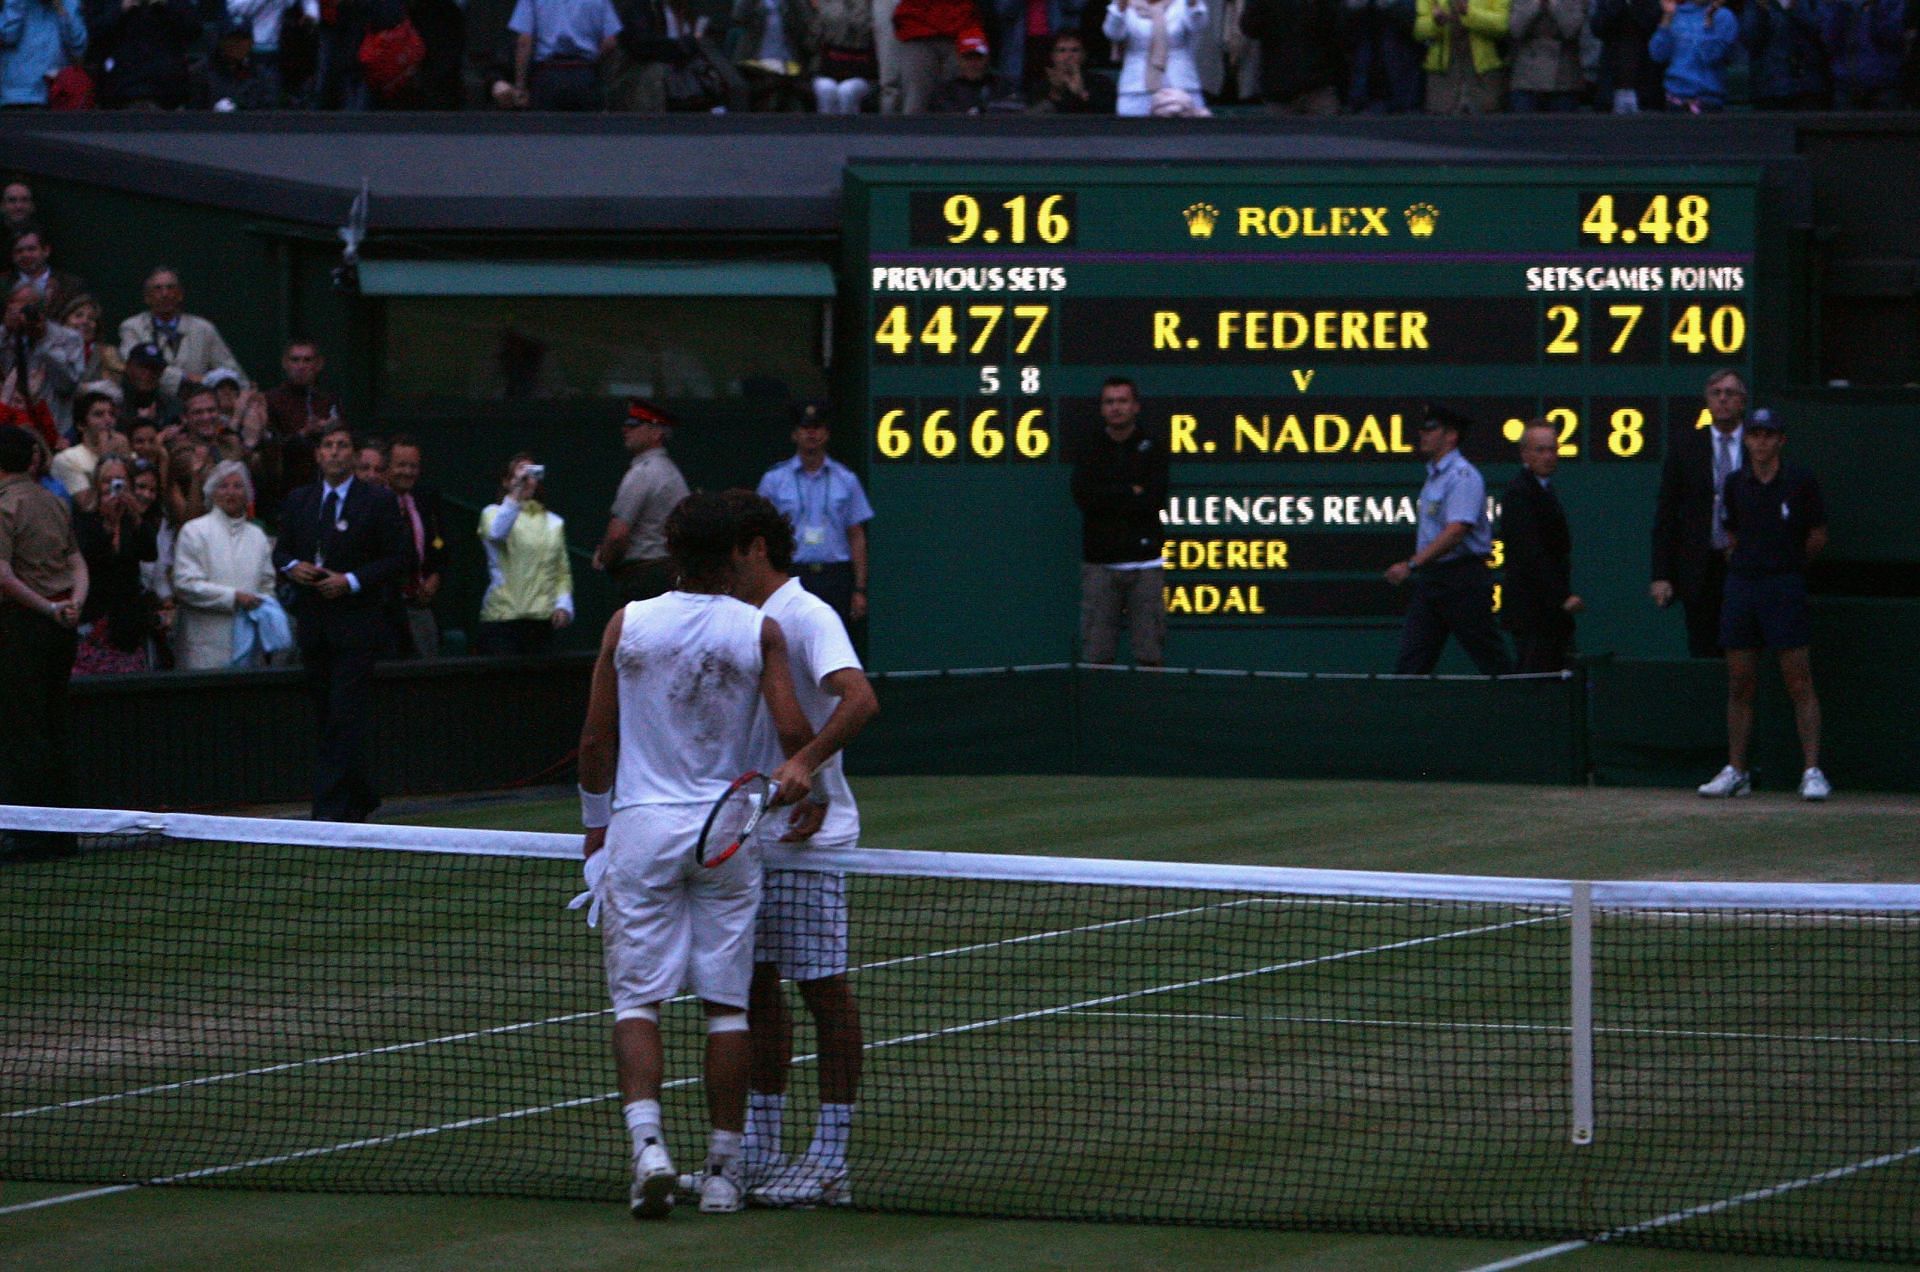 Rafael Nadal and Roger Federer embrace after their Wimbledon 2008 encounter